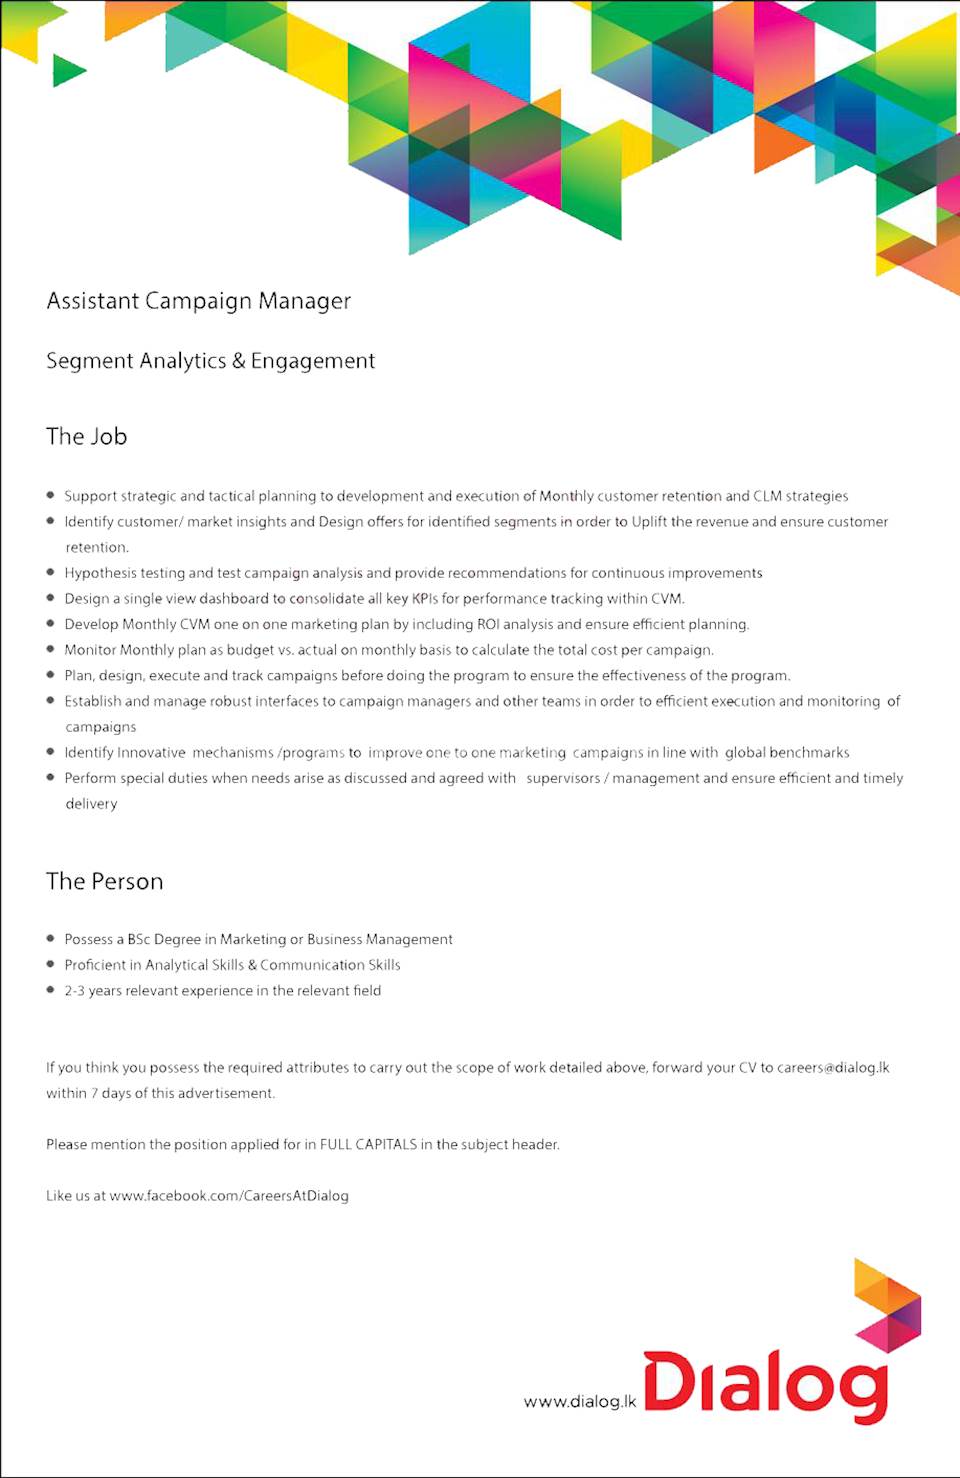 Assistant Campaign Manager 